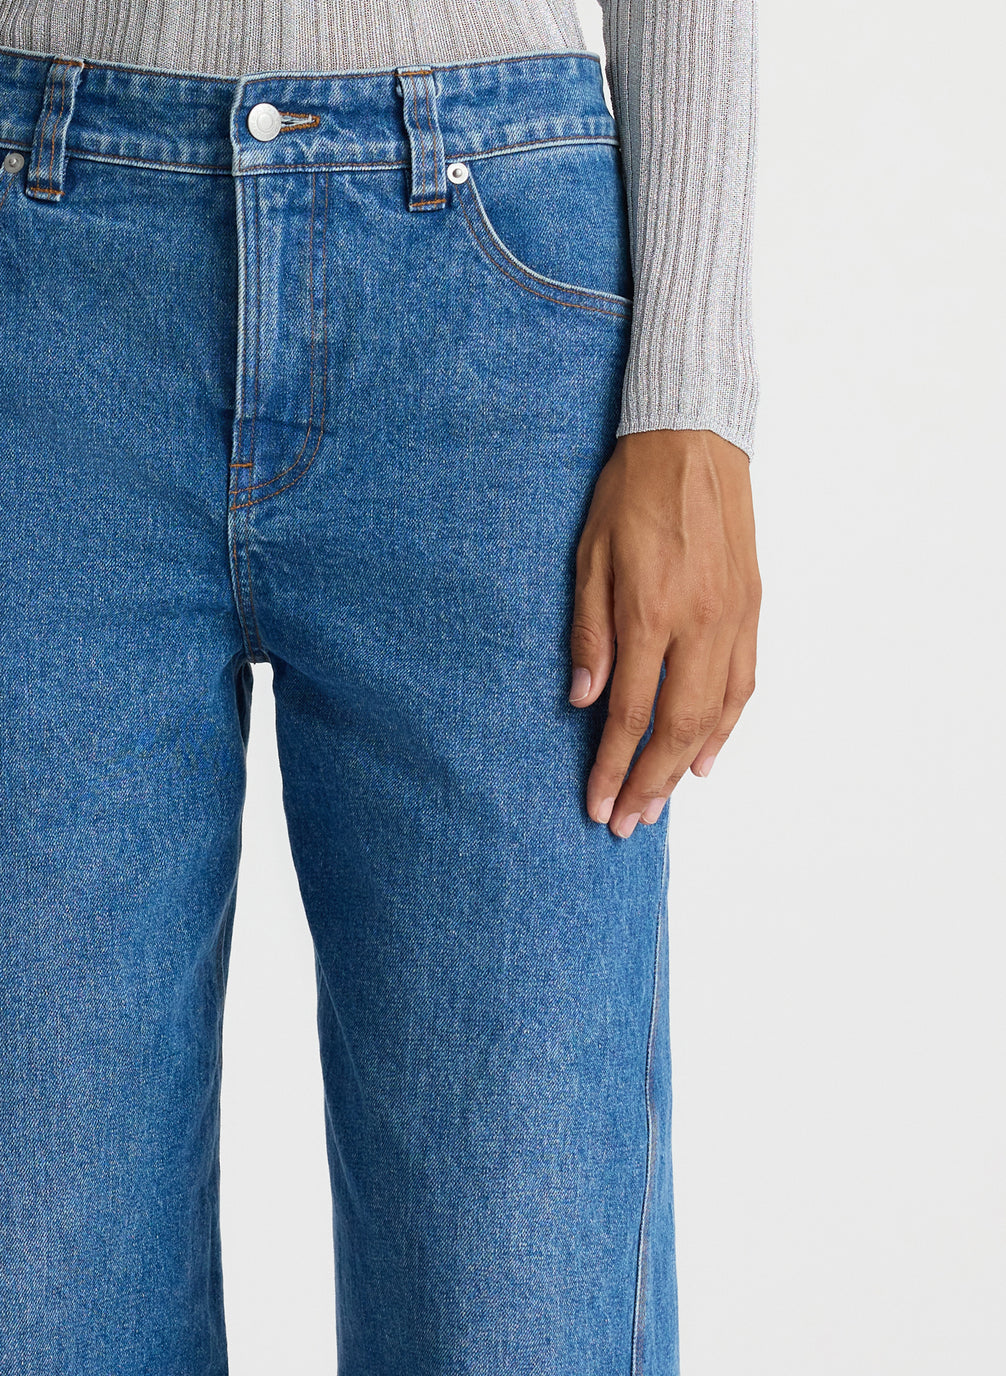 detail of front view of woman in silver long sleeve top and medium blue wash jeans